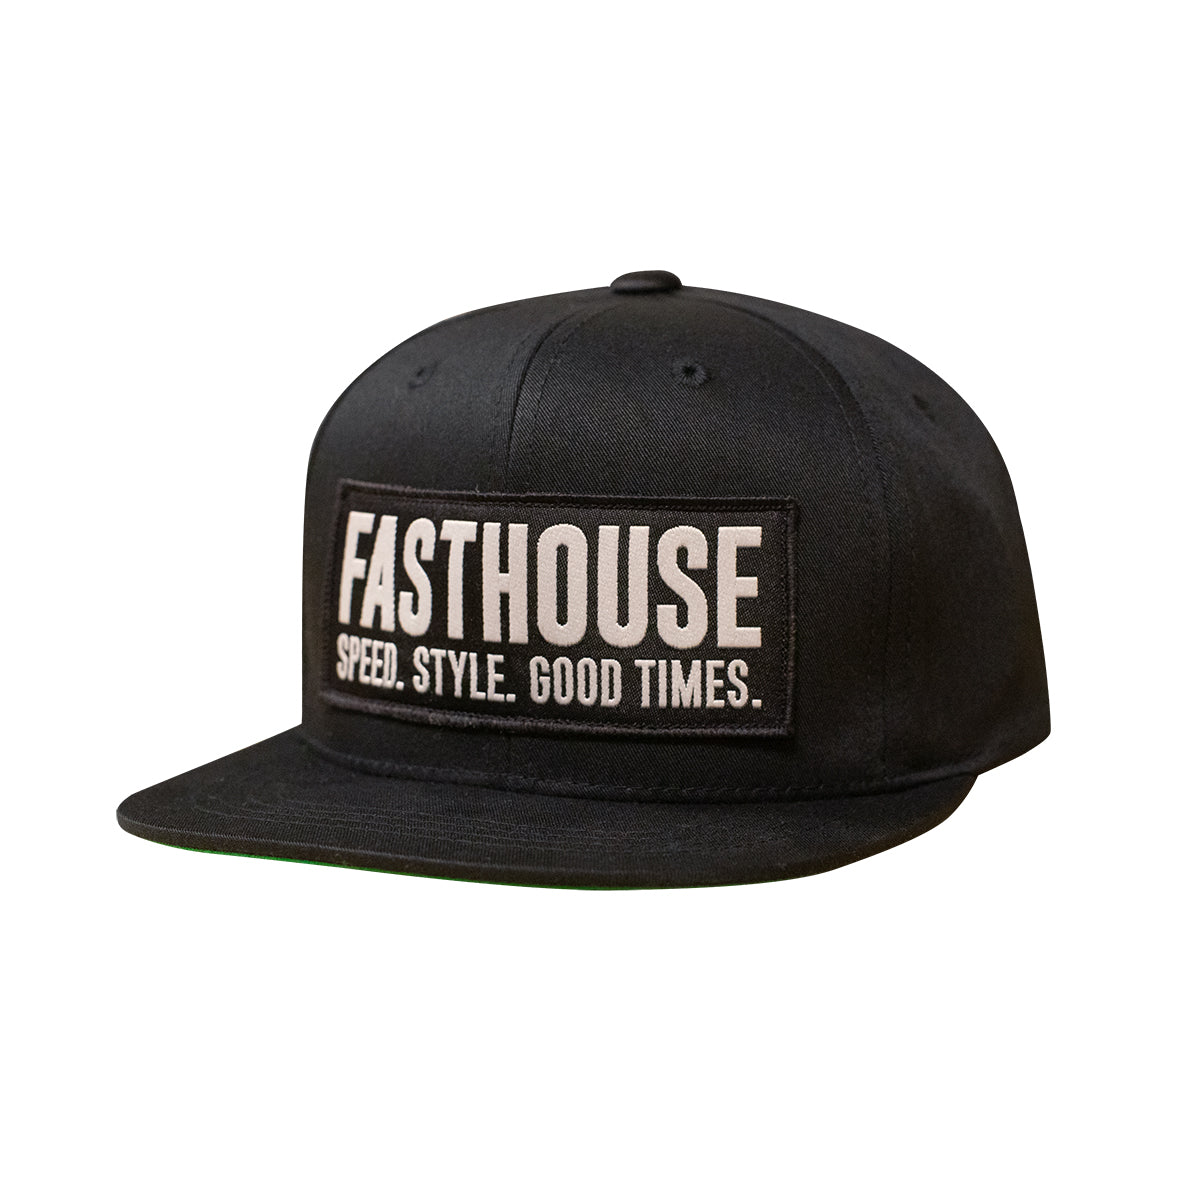 Fasthouse - Blockhouse Youth Hat - Black